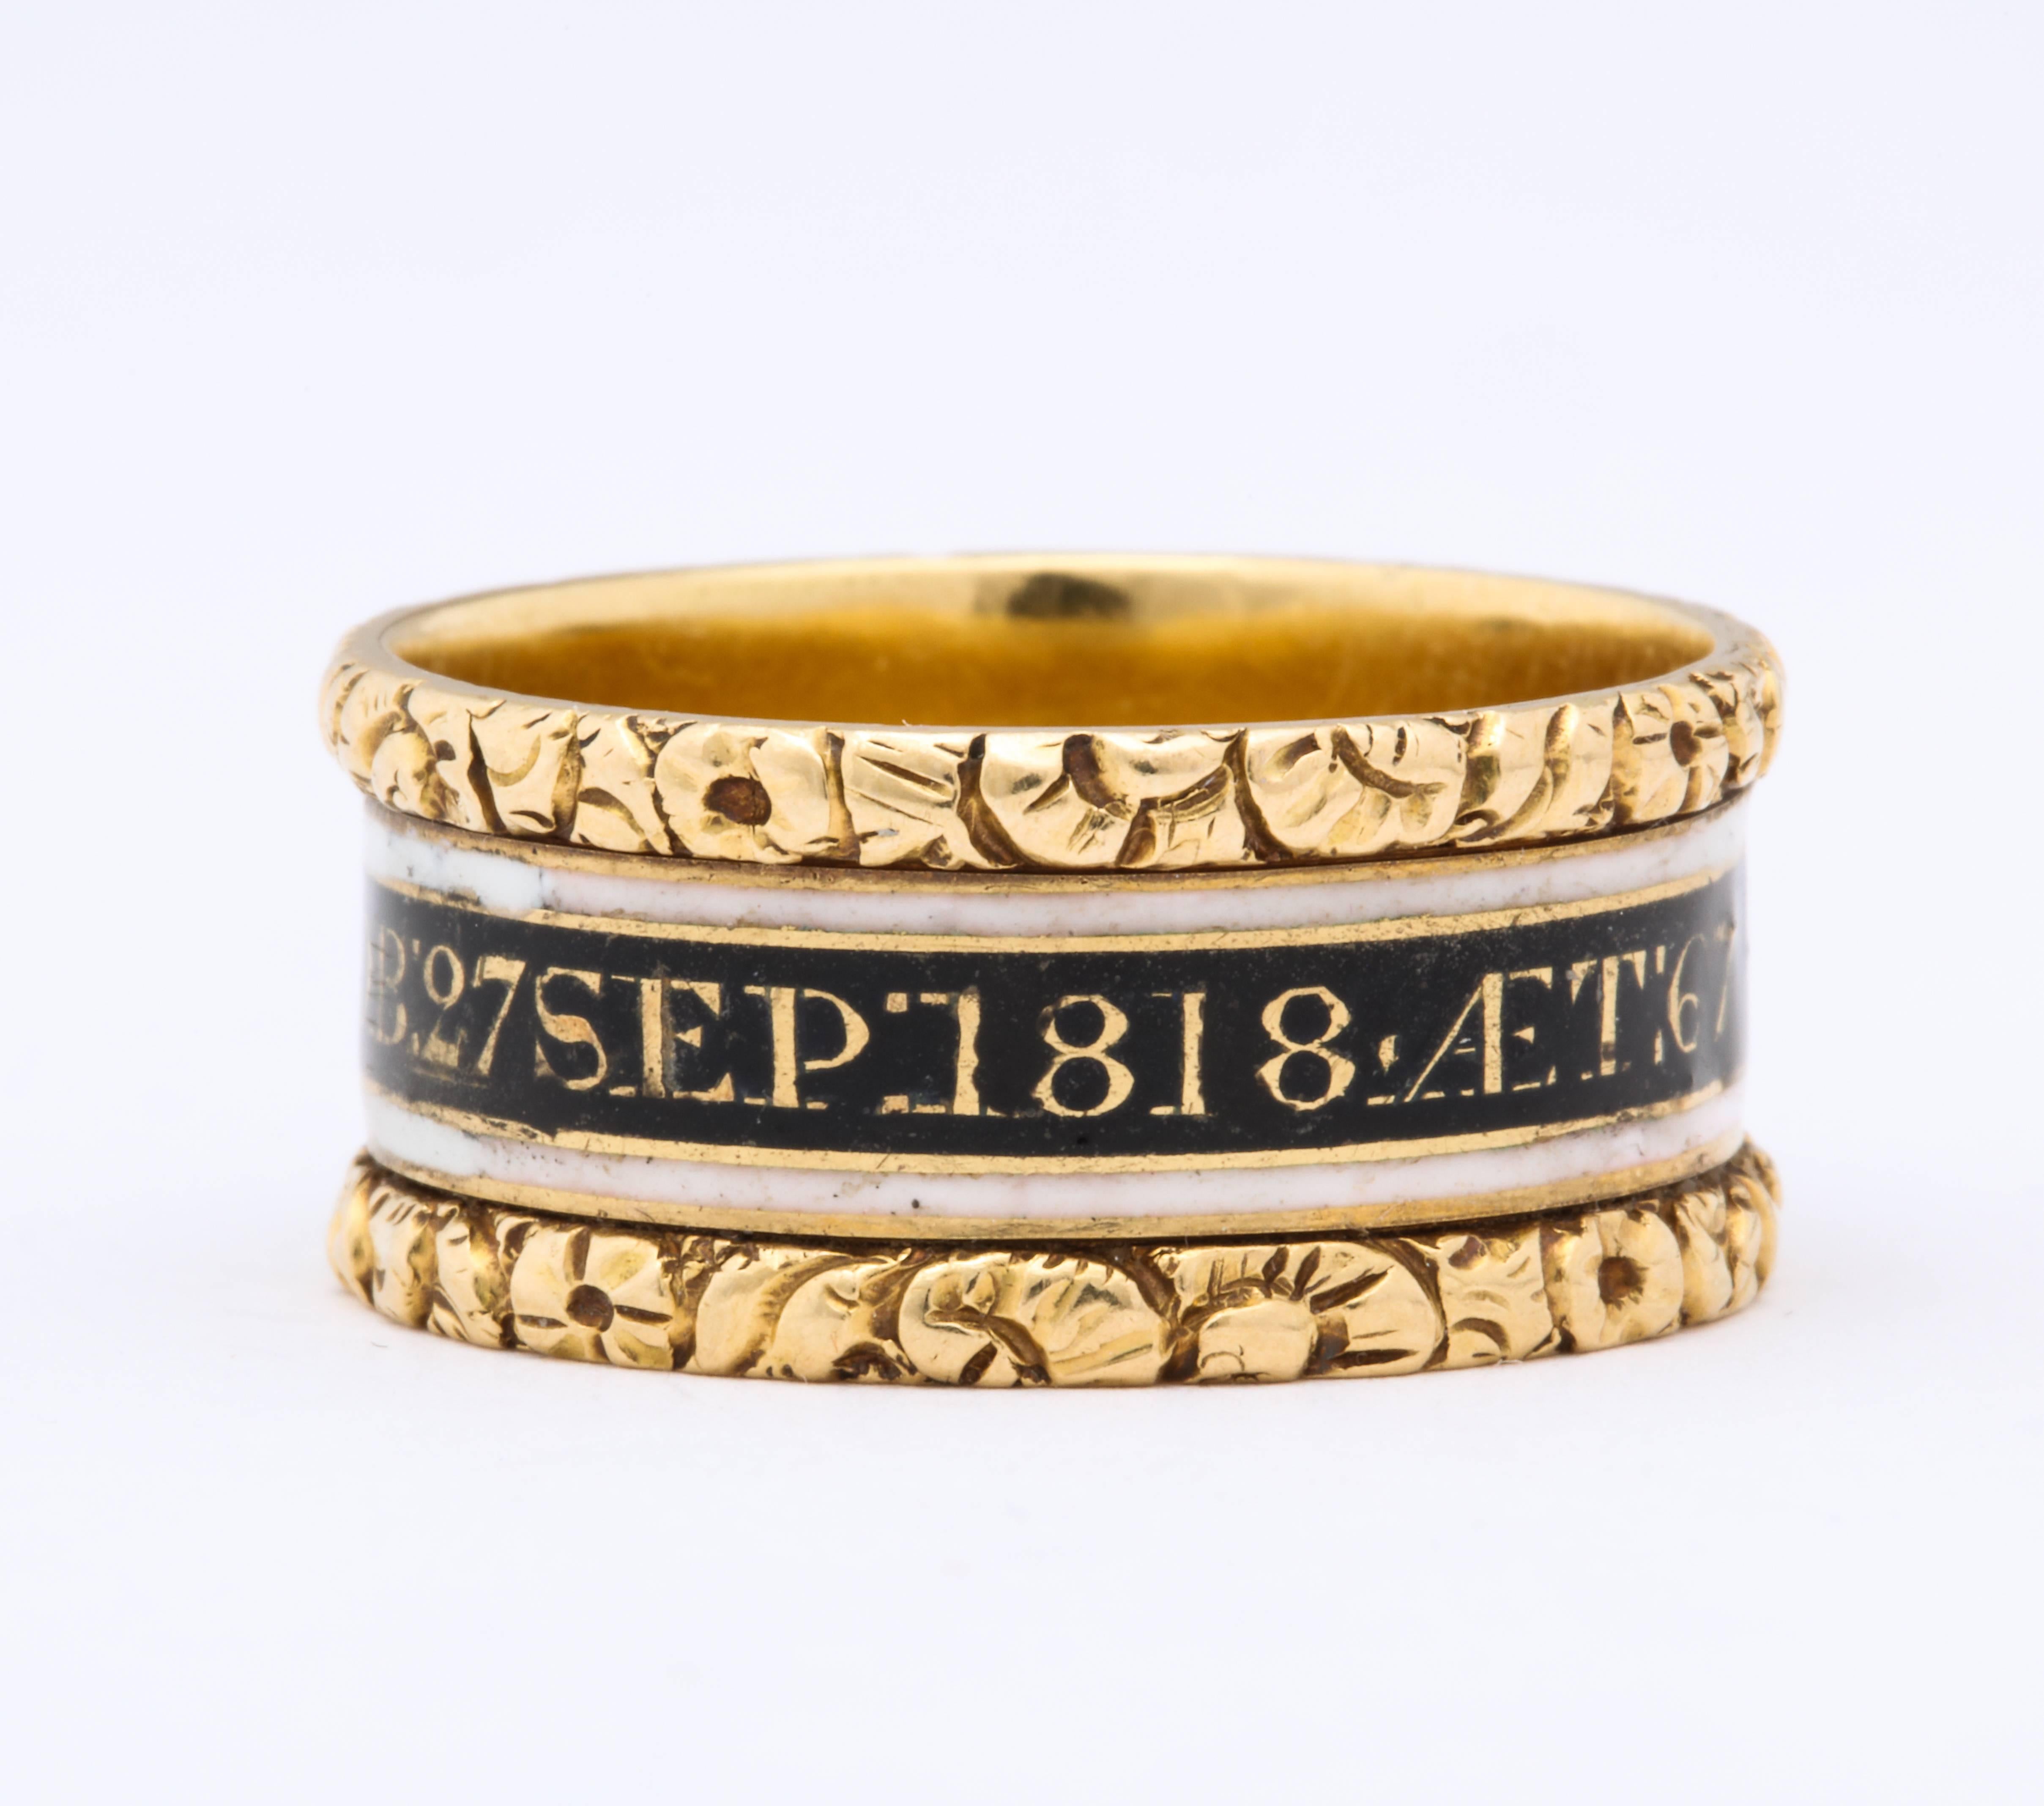 Why do we offer this Georgian Memorial Ring? Because it honors a person who served to protect his country. We separate our strong principle against war from those who put their lives on the line. Crisp and clear raised engraved edges protect this